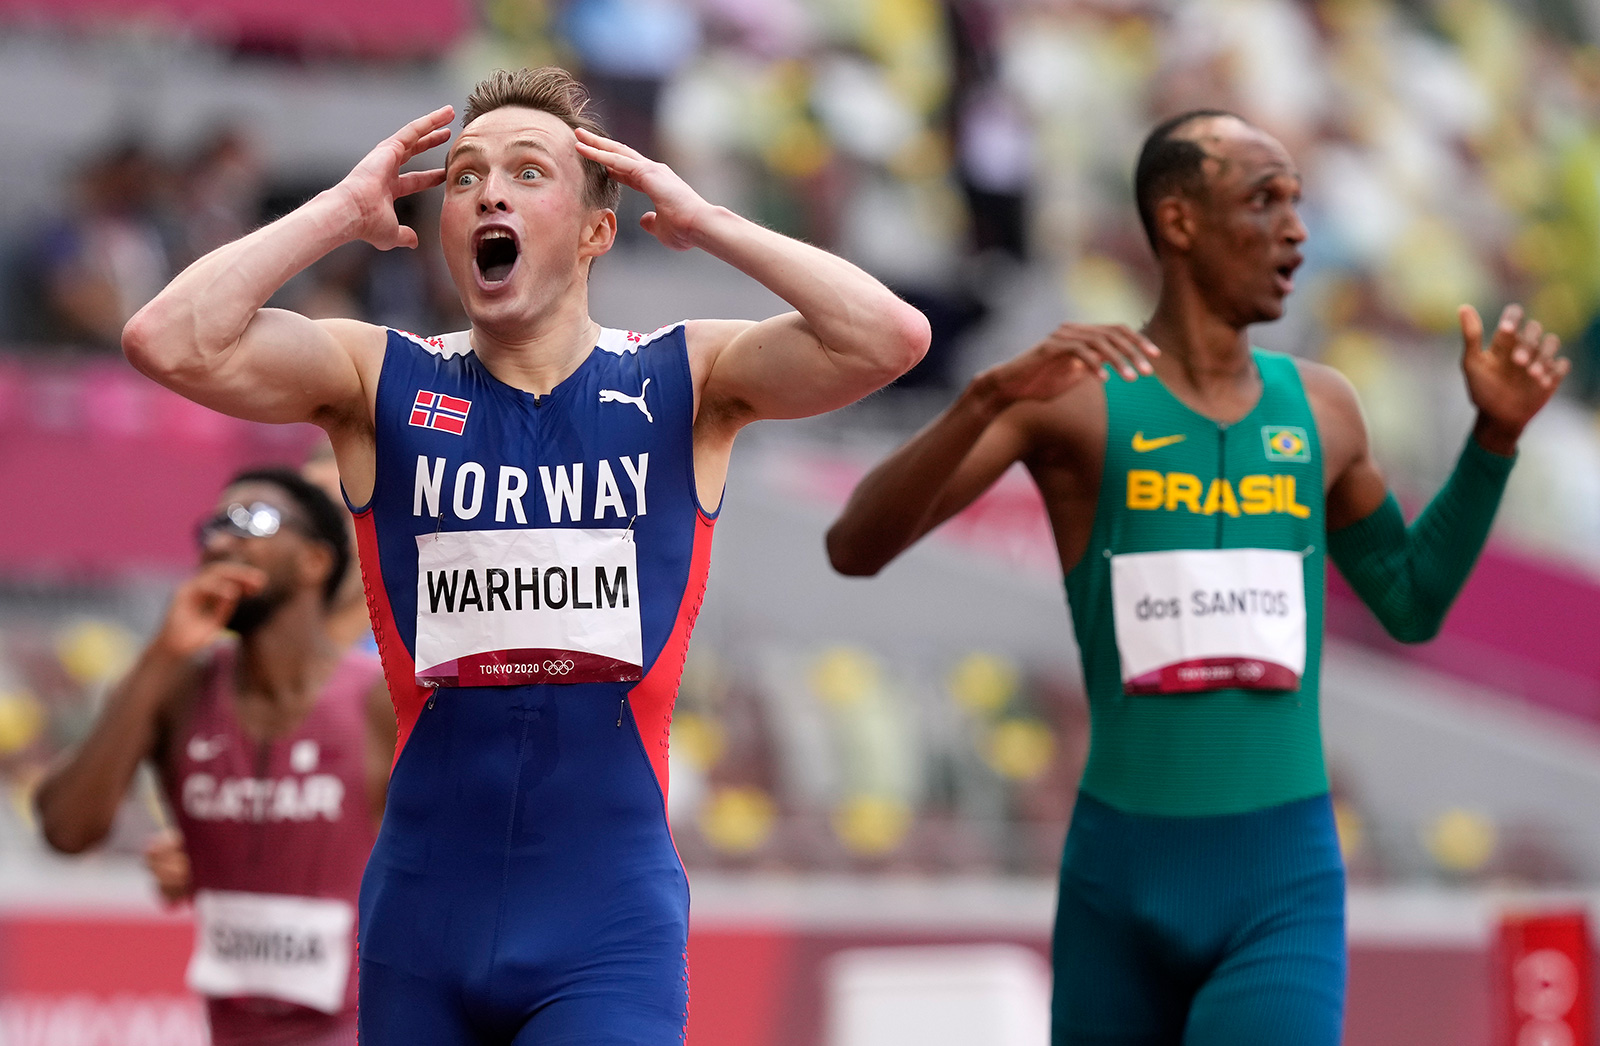 Norway's Karsten Warholm celebrates after winning the gold medal and breaking a world record in the 400 meter hurdles final on Tuesday.